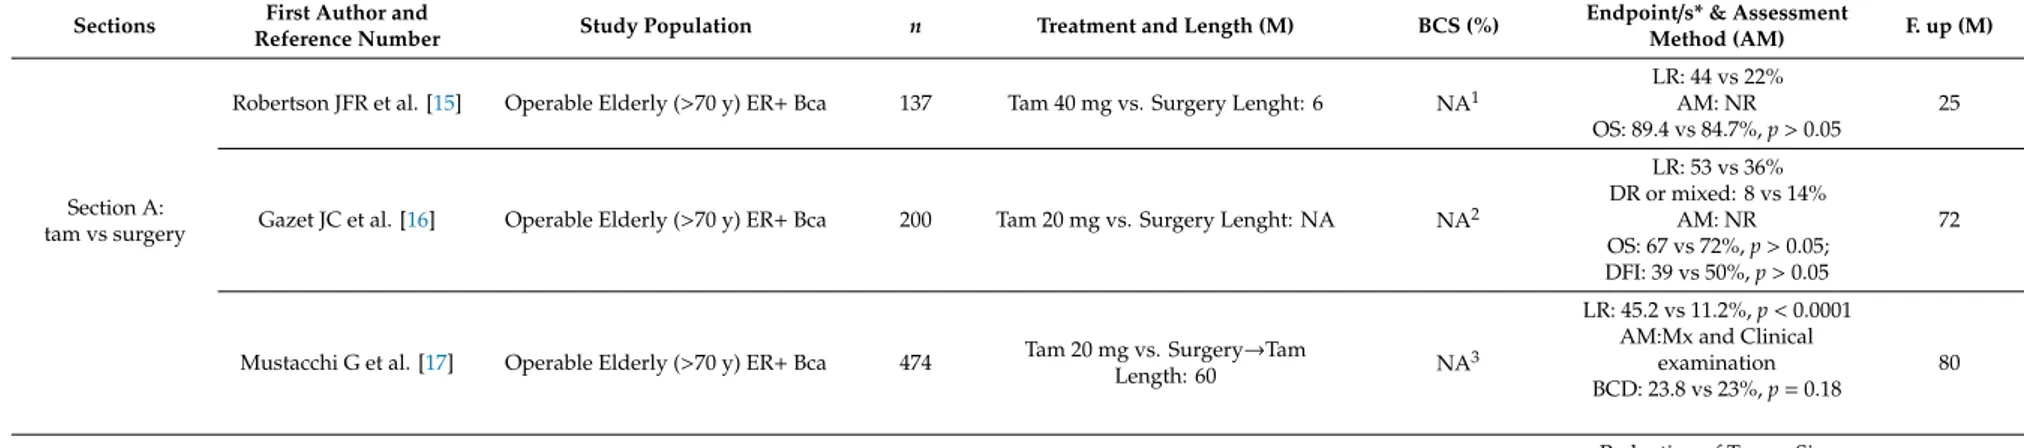 Table 1. Clinical trials of tamoxifen vs. surgery (section A); Aromatase inhibitors’ monotherapy (Section B) and aromatase inhibitors vs